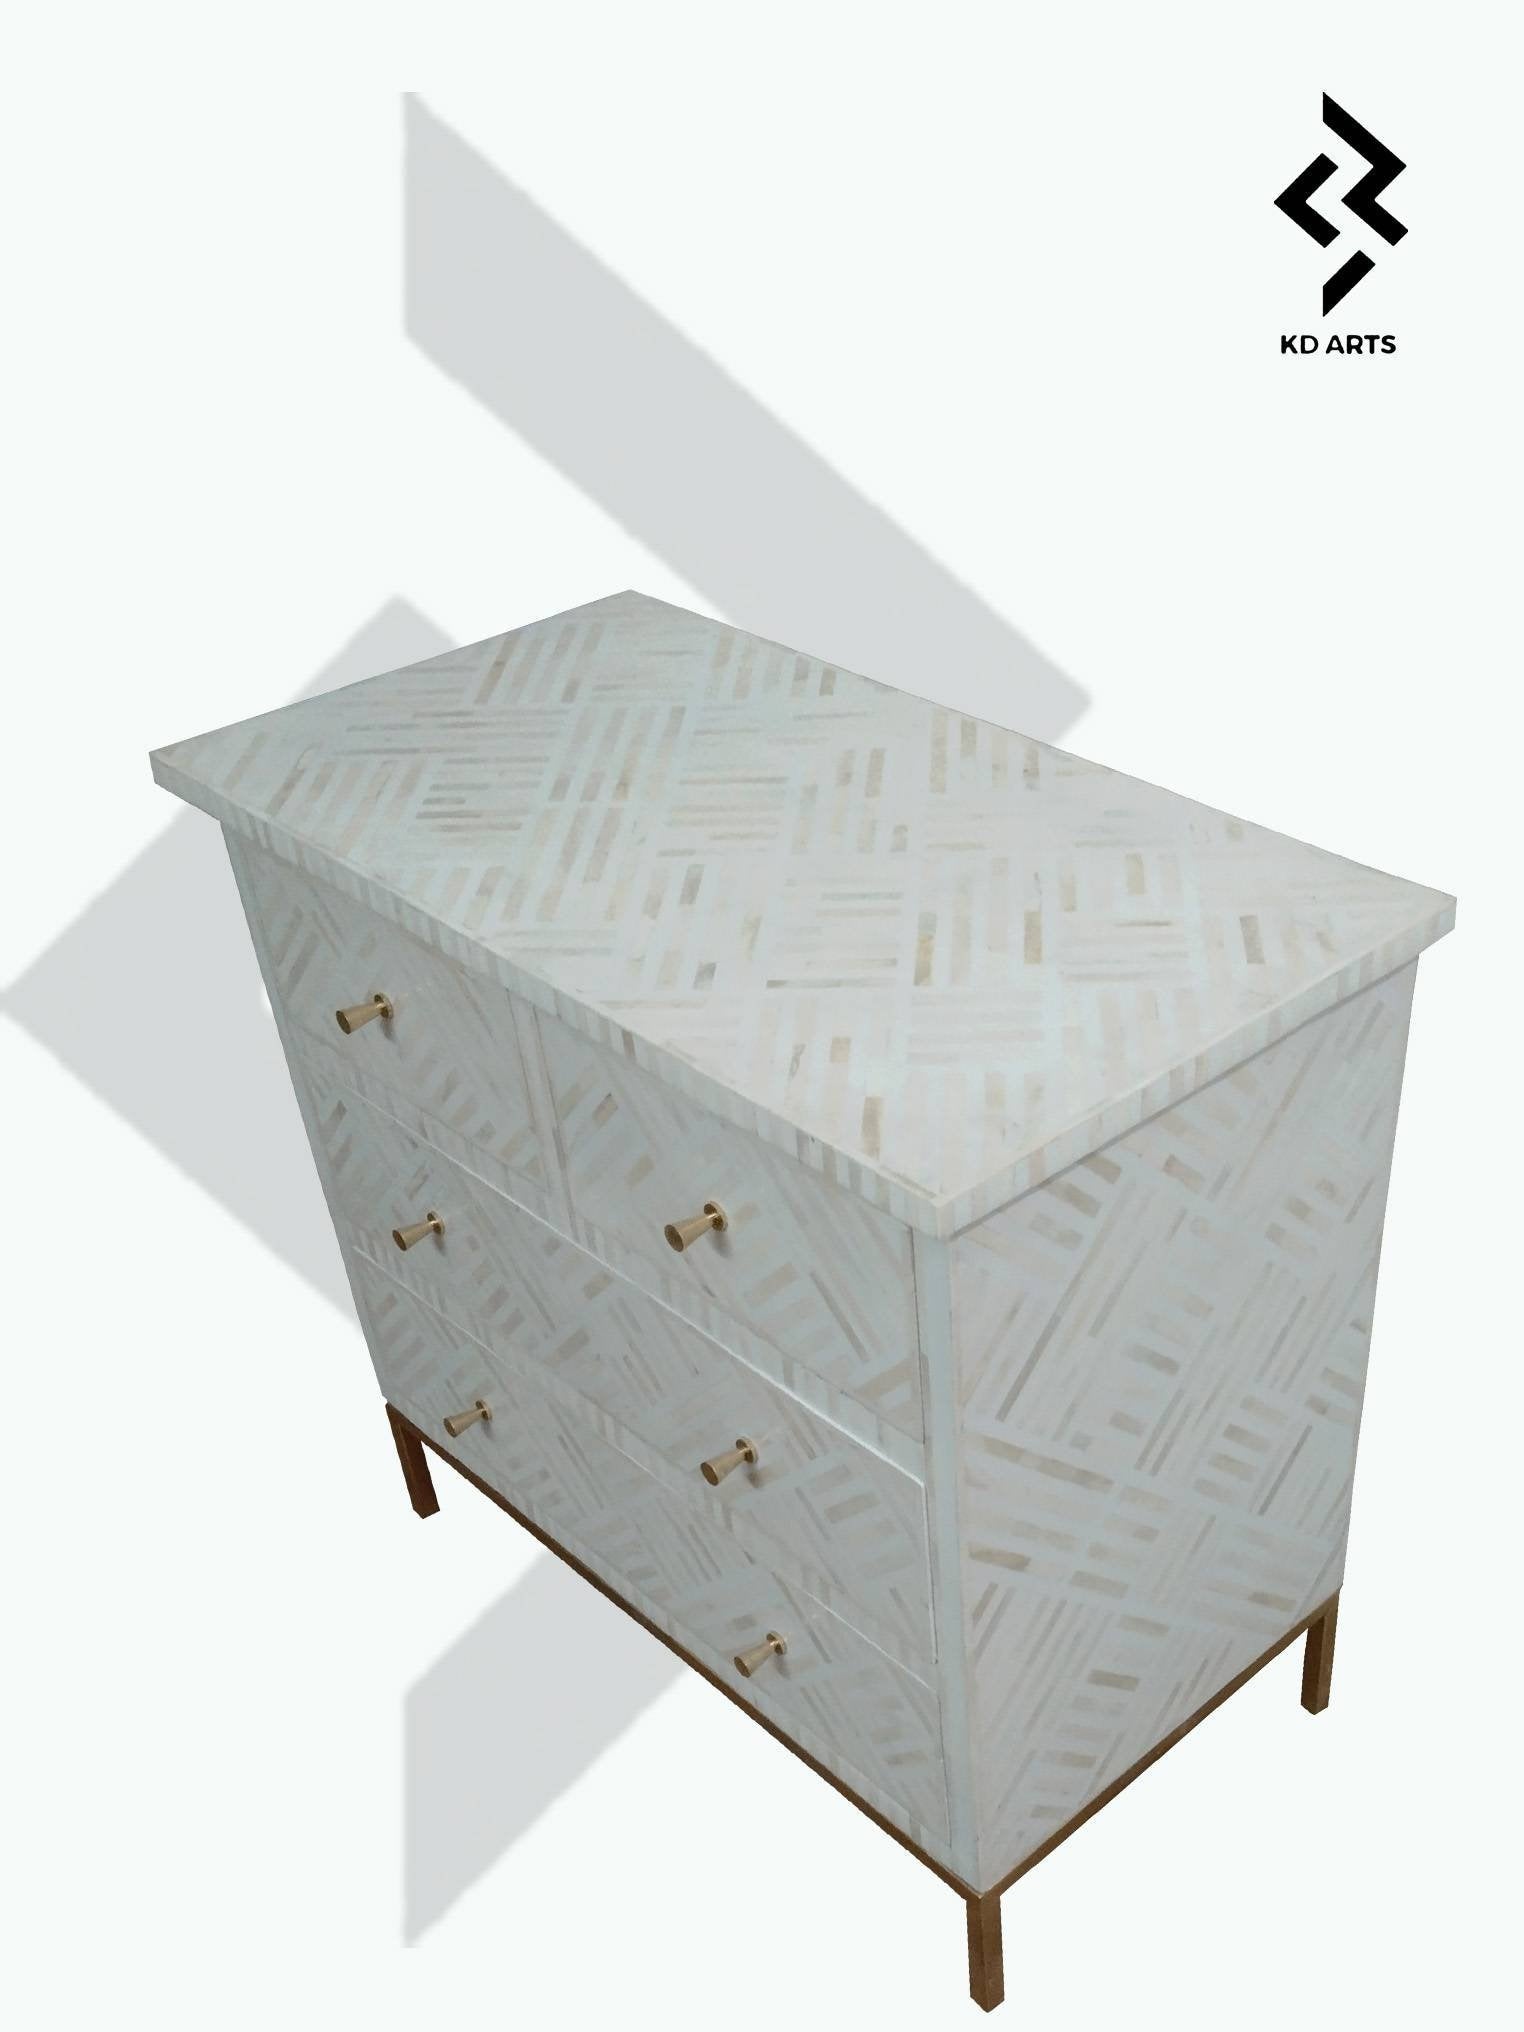 Four drawers bone inlay chest/ Storage unit/Bone Inlay Dresser white/ Inlay Cupboard white/ Chest of Drawers in White criss cross pattern